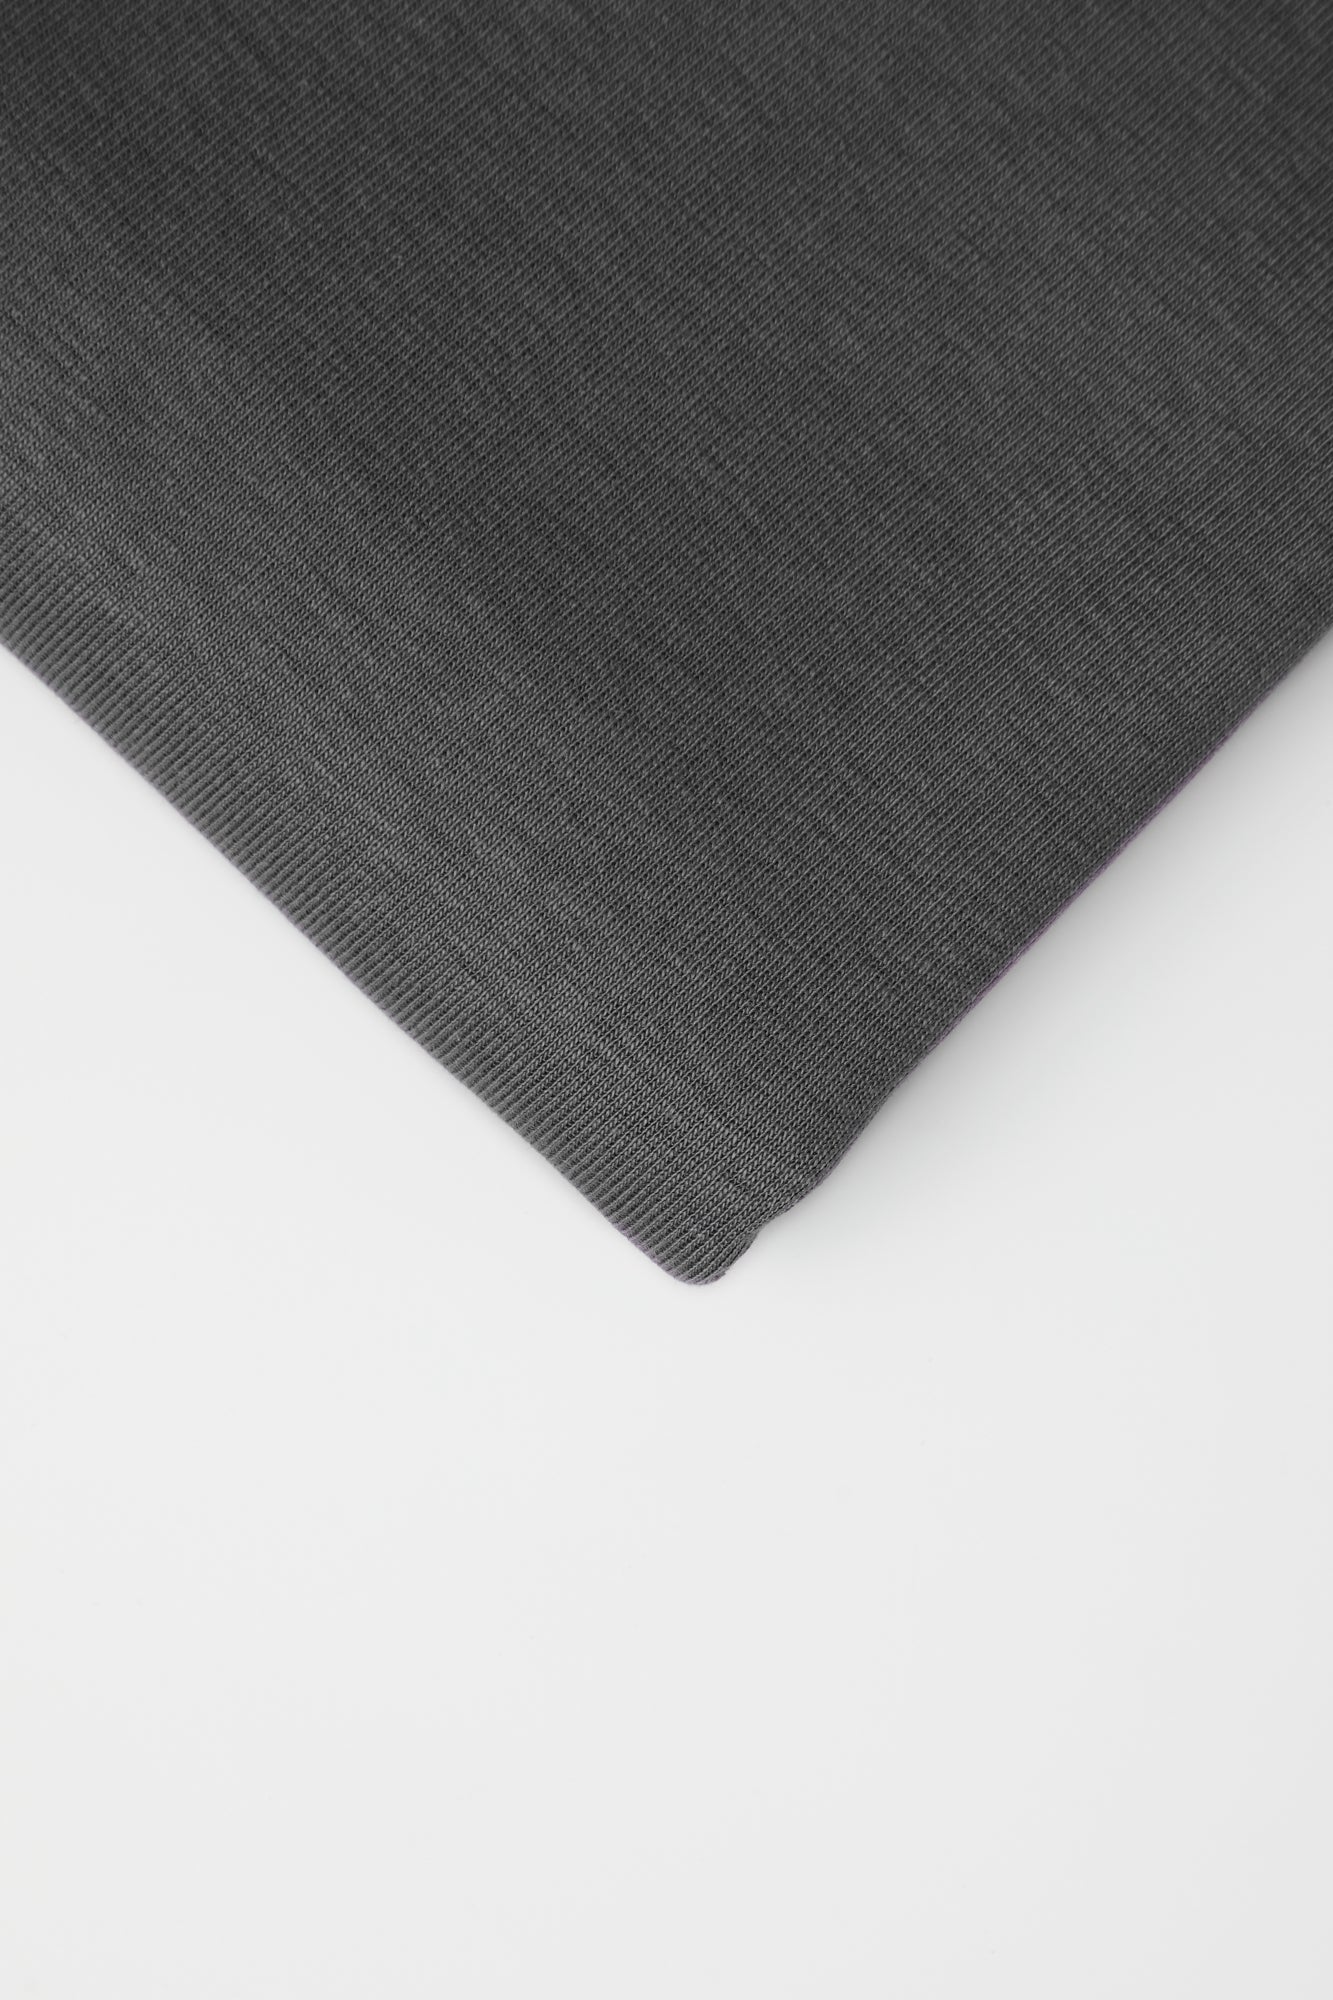 Close up of dark grey organic cotton and tencel knit sewing fabric on white background